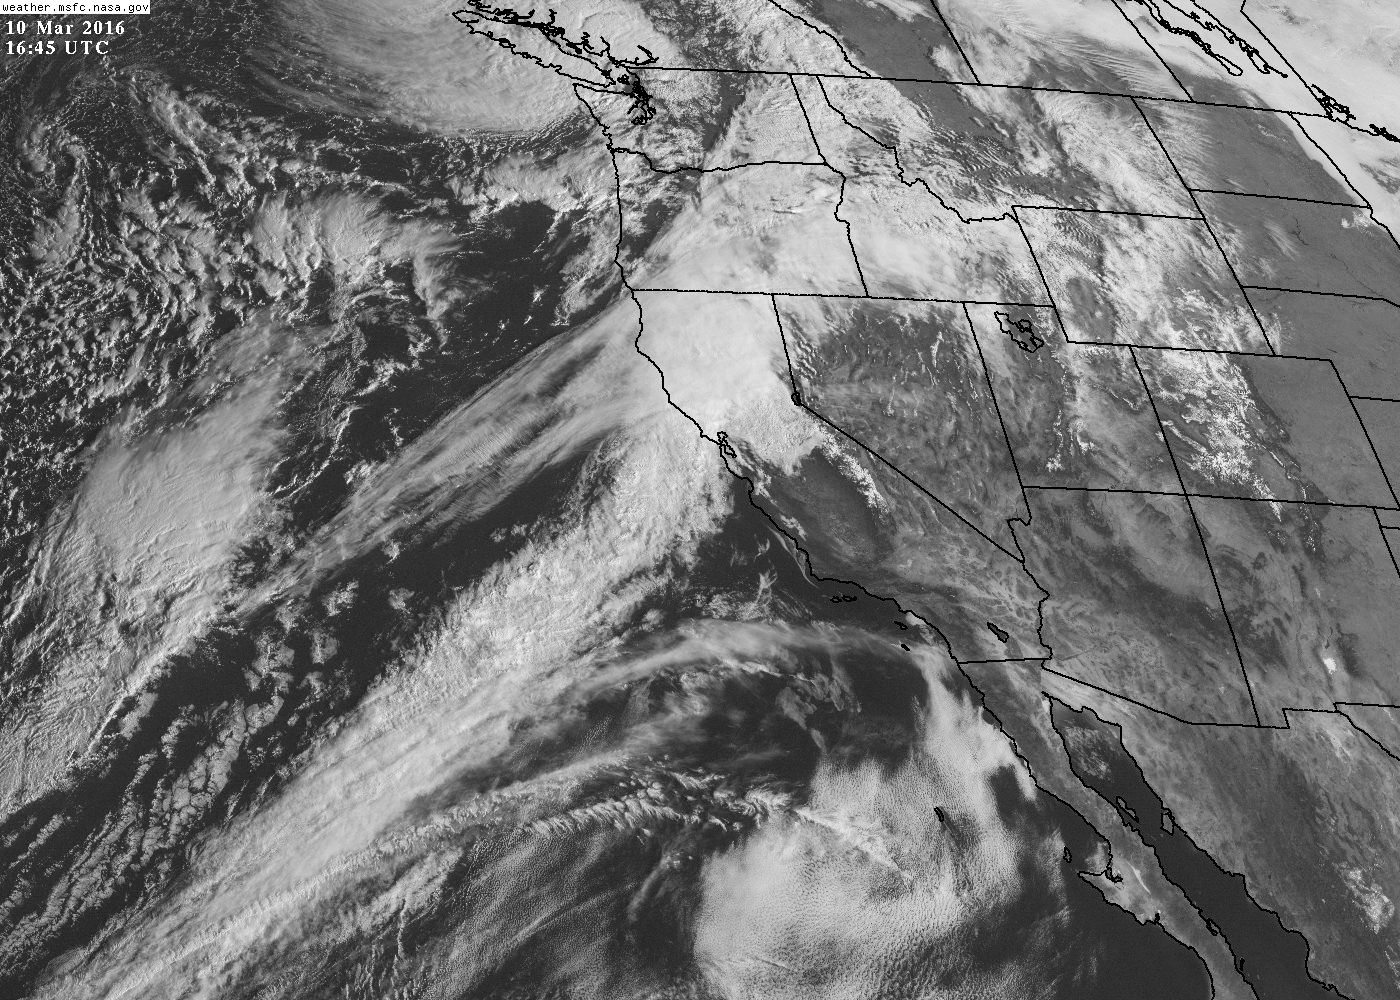 An image from NOAA's GOES West satellite showing the atmospheric river feeding Thursday' s heavy rain over the northern part of the Bay Area.  NOAA